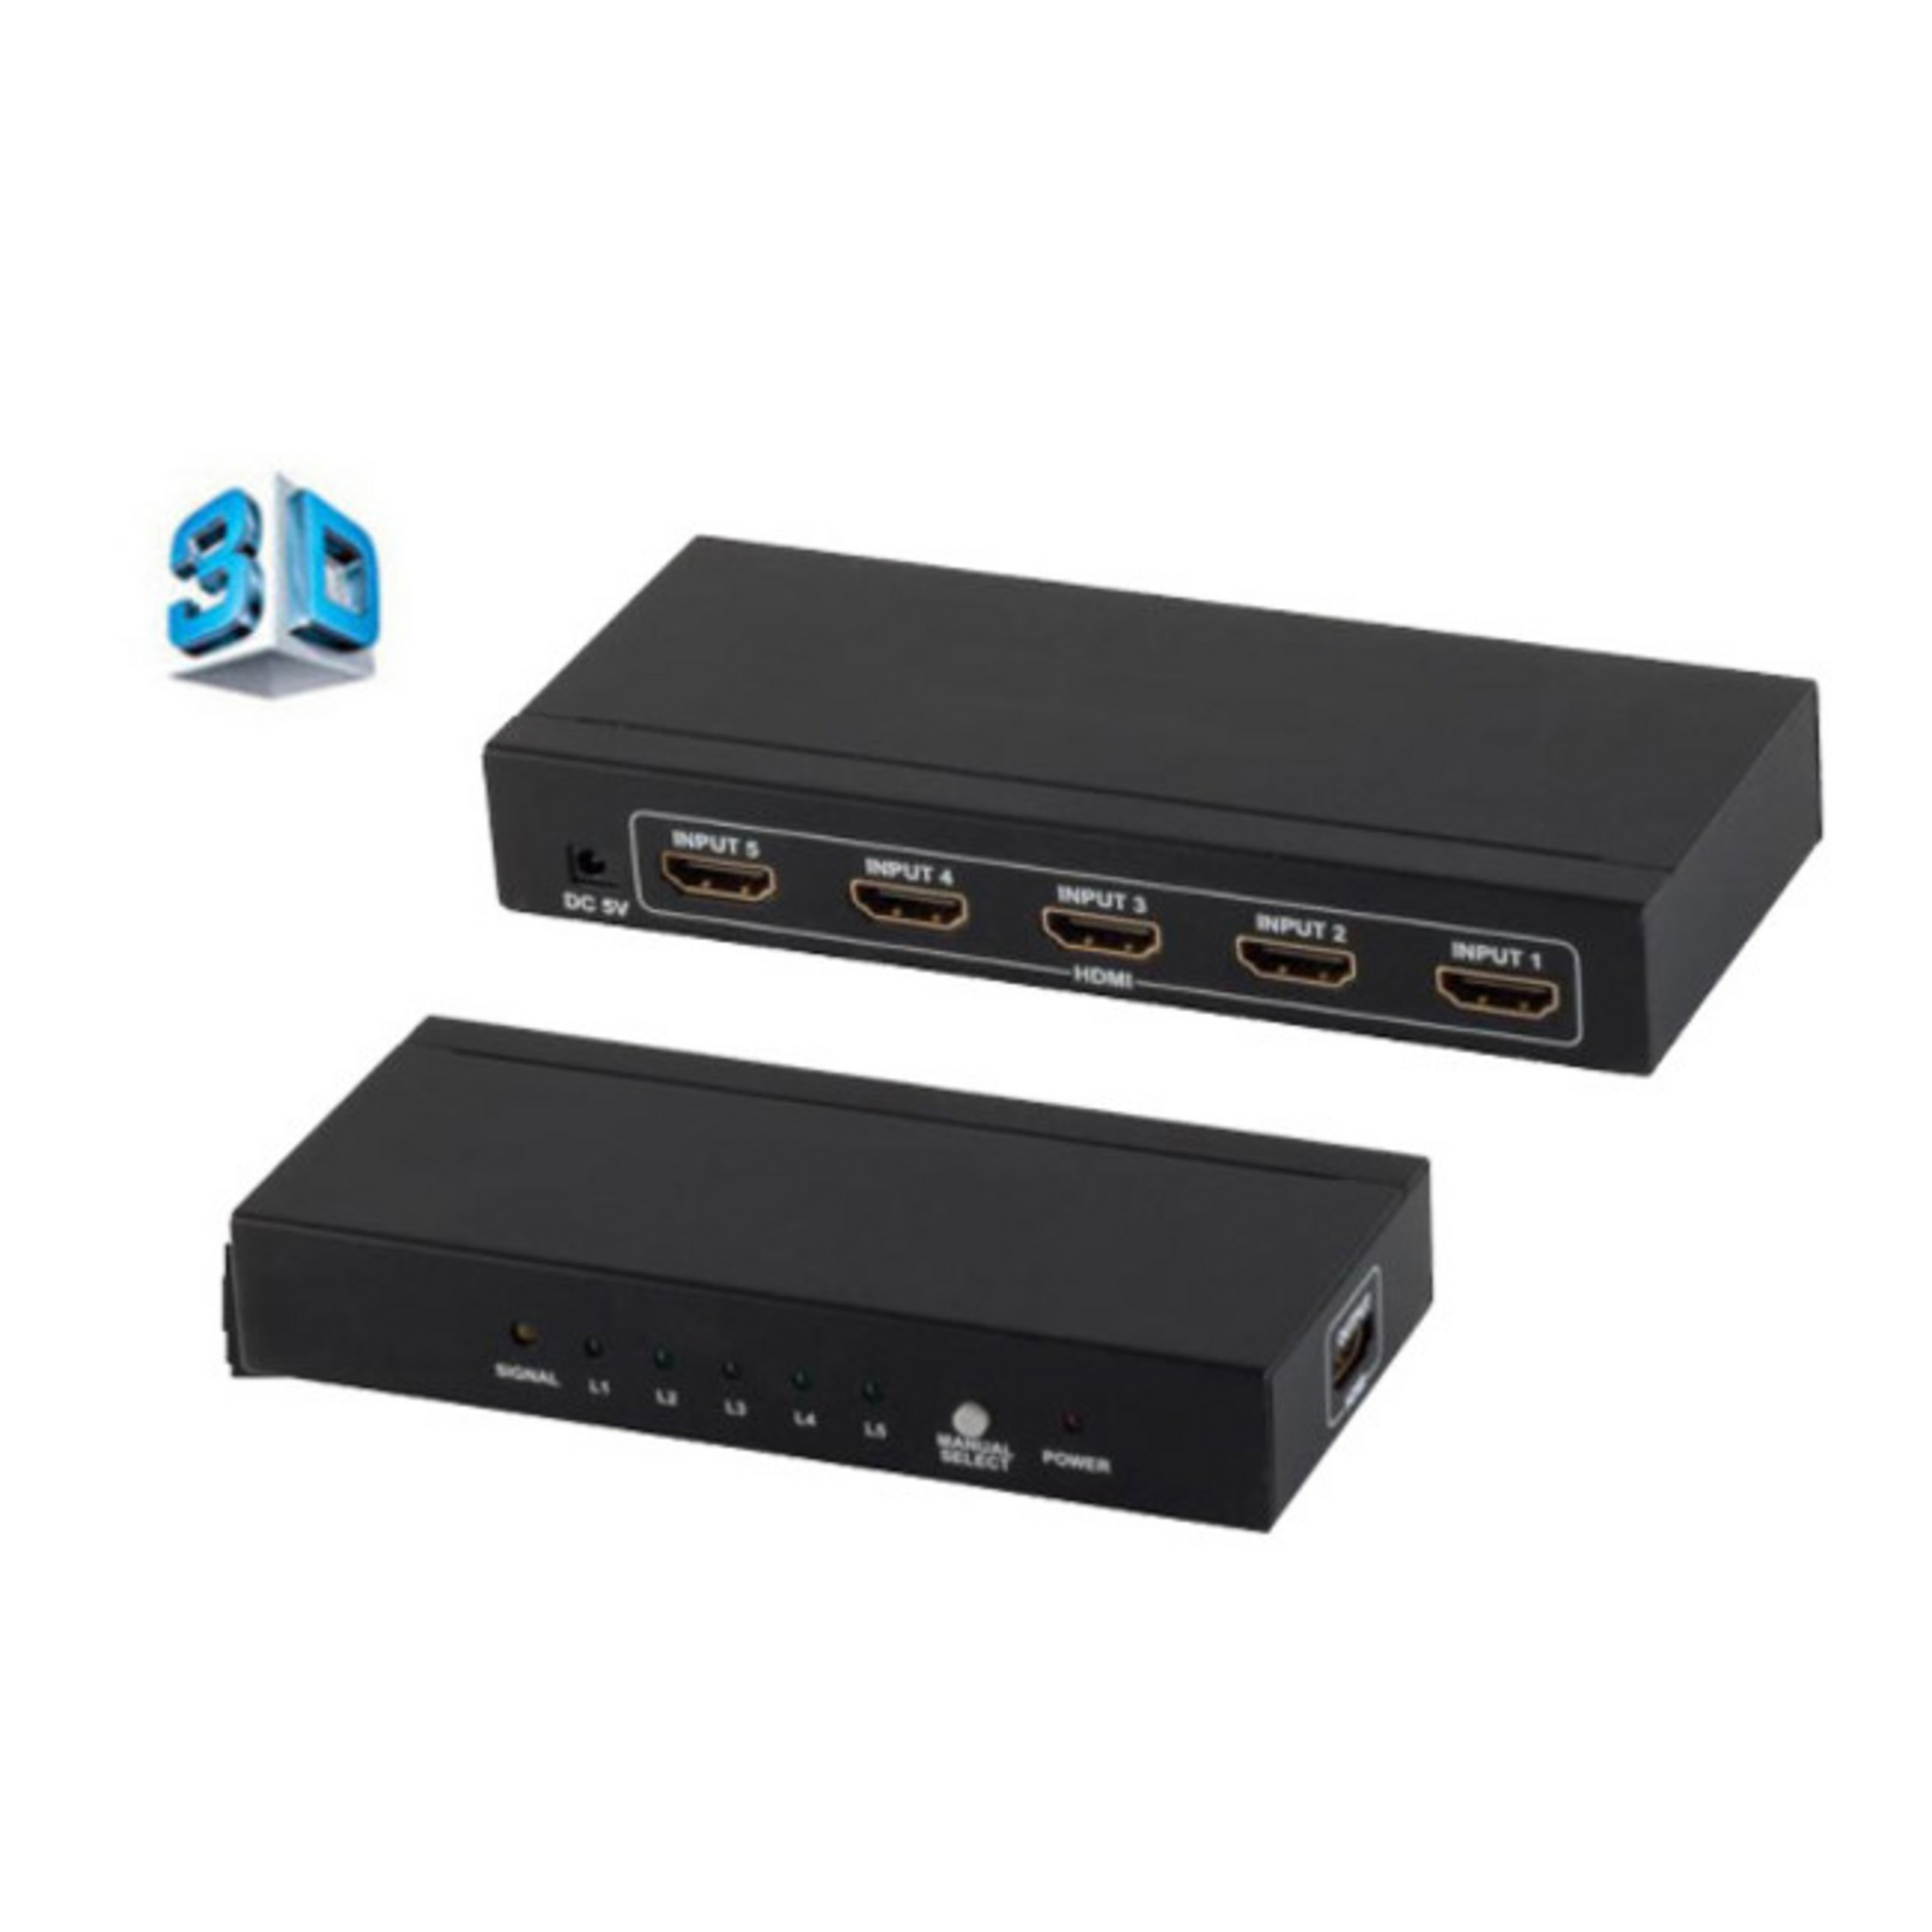 HDMI SHIVERPEAKS Switch 4K2K, 1x Switch, VER1.4 3D, 5x HDMI IN OUT,